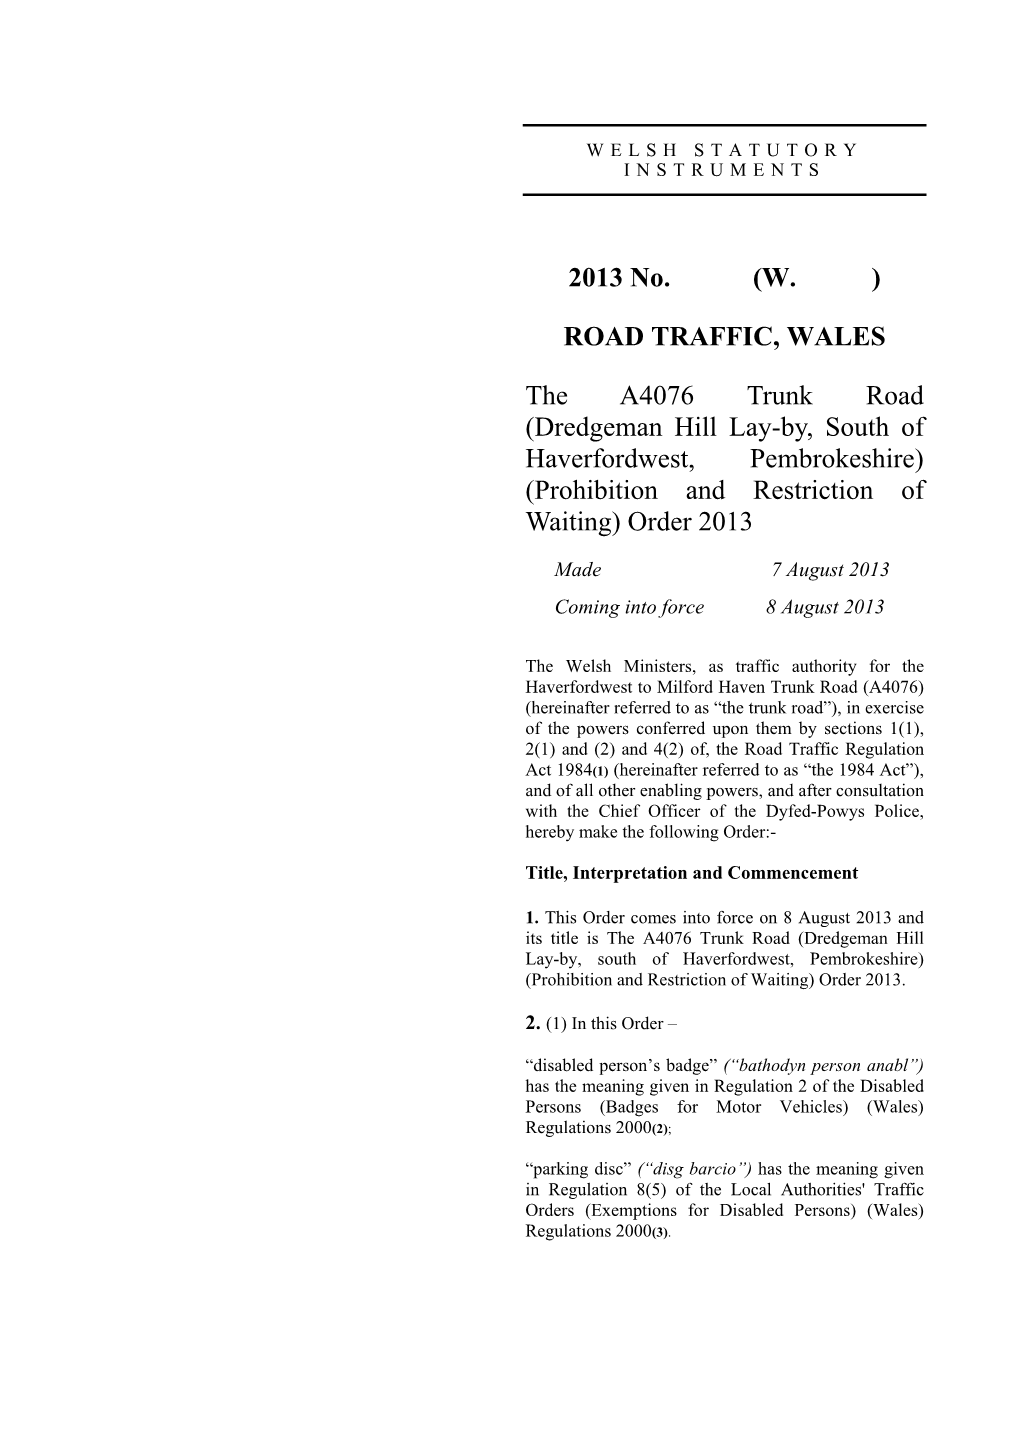 The A4076 Trunk Road (Dredgeman Hill Lay-By, South of Haverfordwest, Pembrokeshire) (Prohibition and Restriction of Waiting) Order 2013